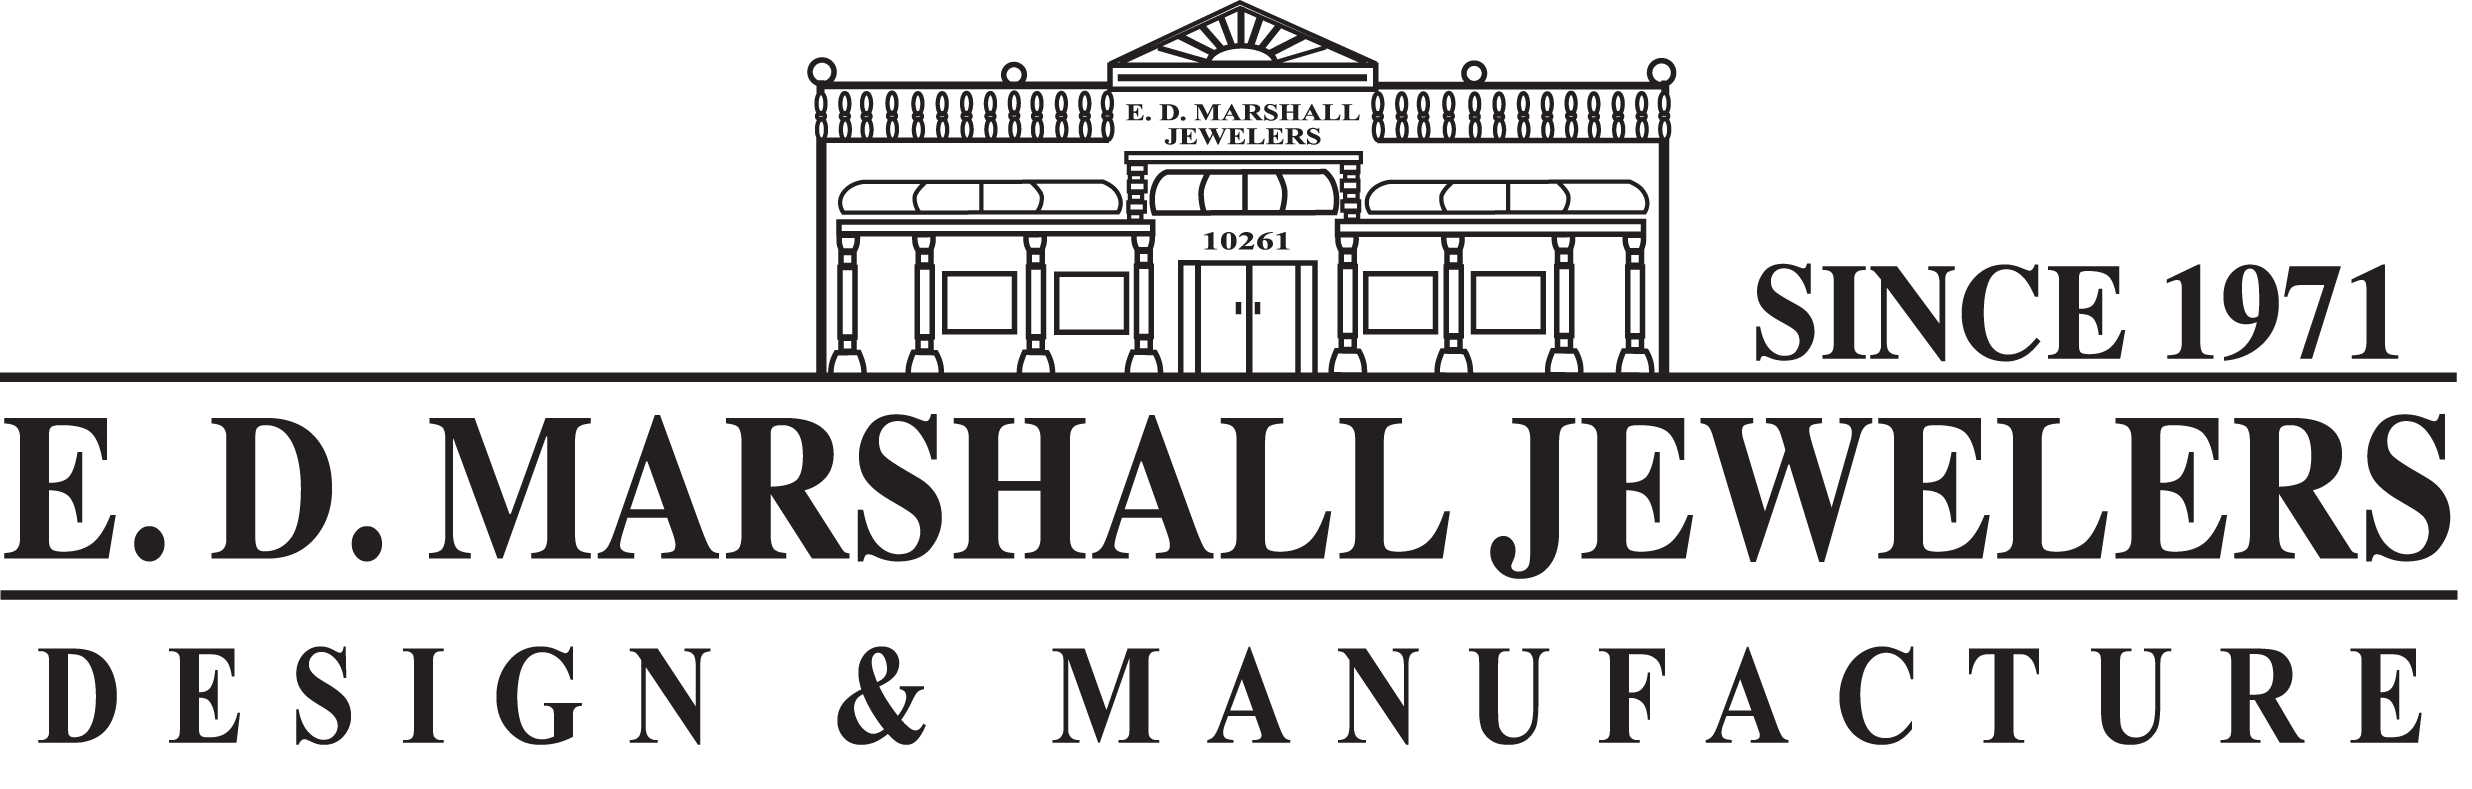 E. D. Marshall Jewelers | Design & Manufacture